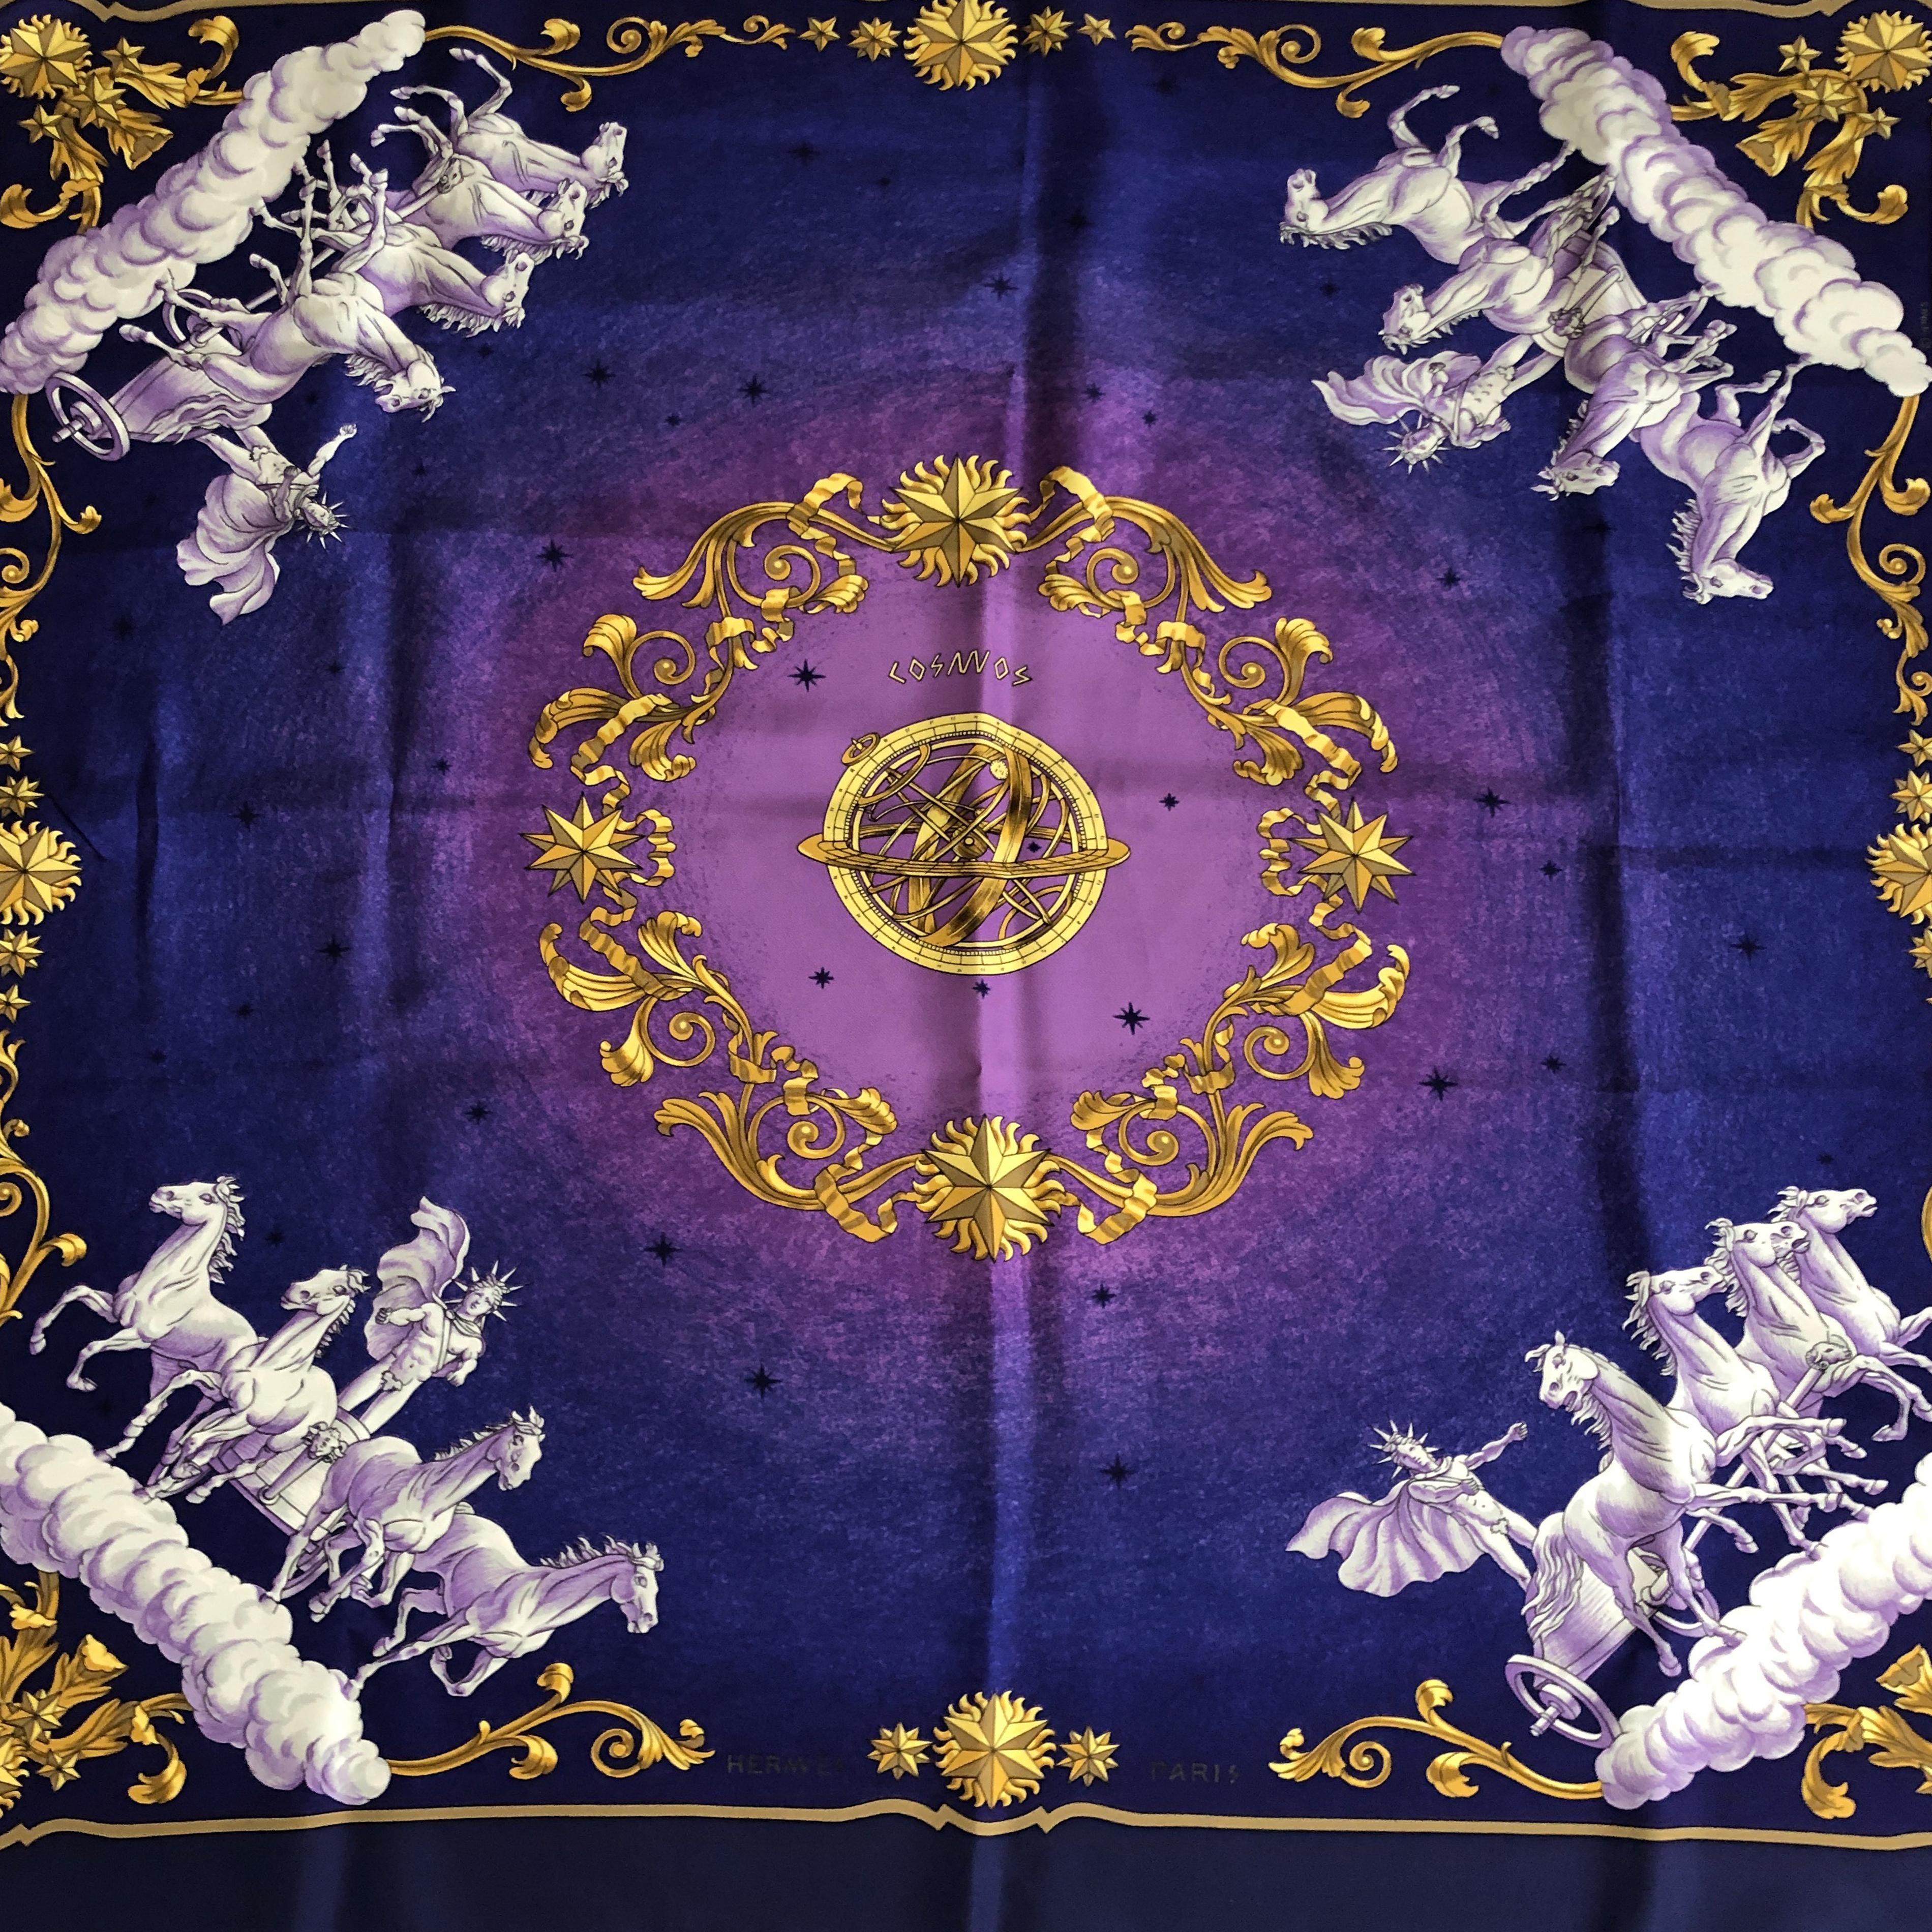 Hermes Cosmos Silk Twill scarf or shawl by Philippe Ledoux. Originally designed by Ledoux in 1964, this celestial scarf has become so popular amongst Hermès collectors that it's been reissued several times over the years (this piece is from the mid